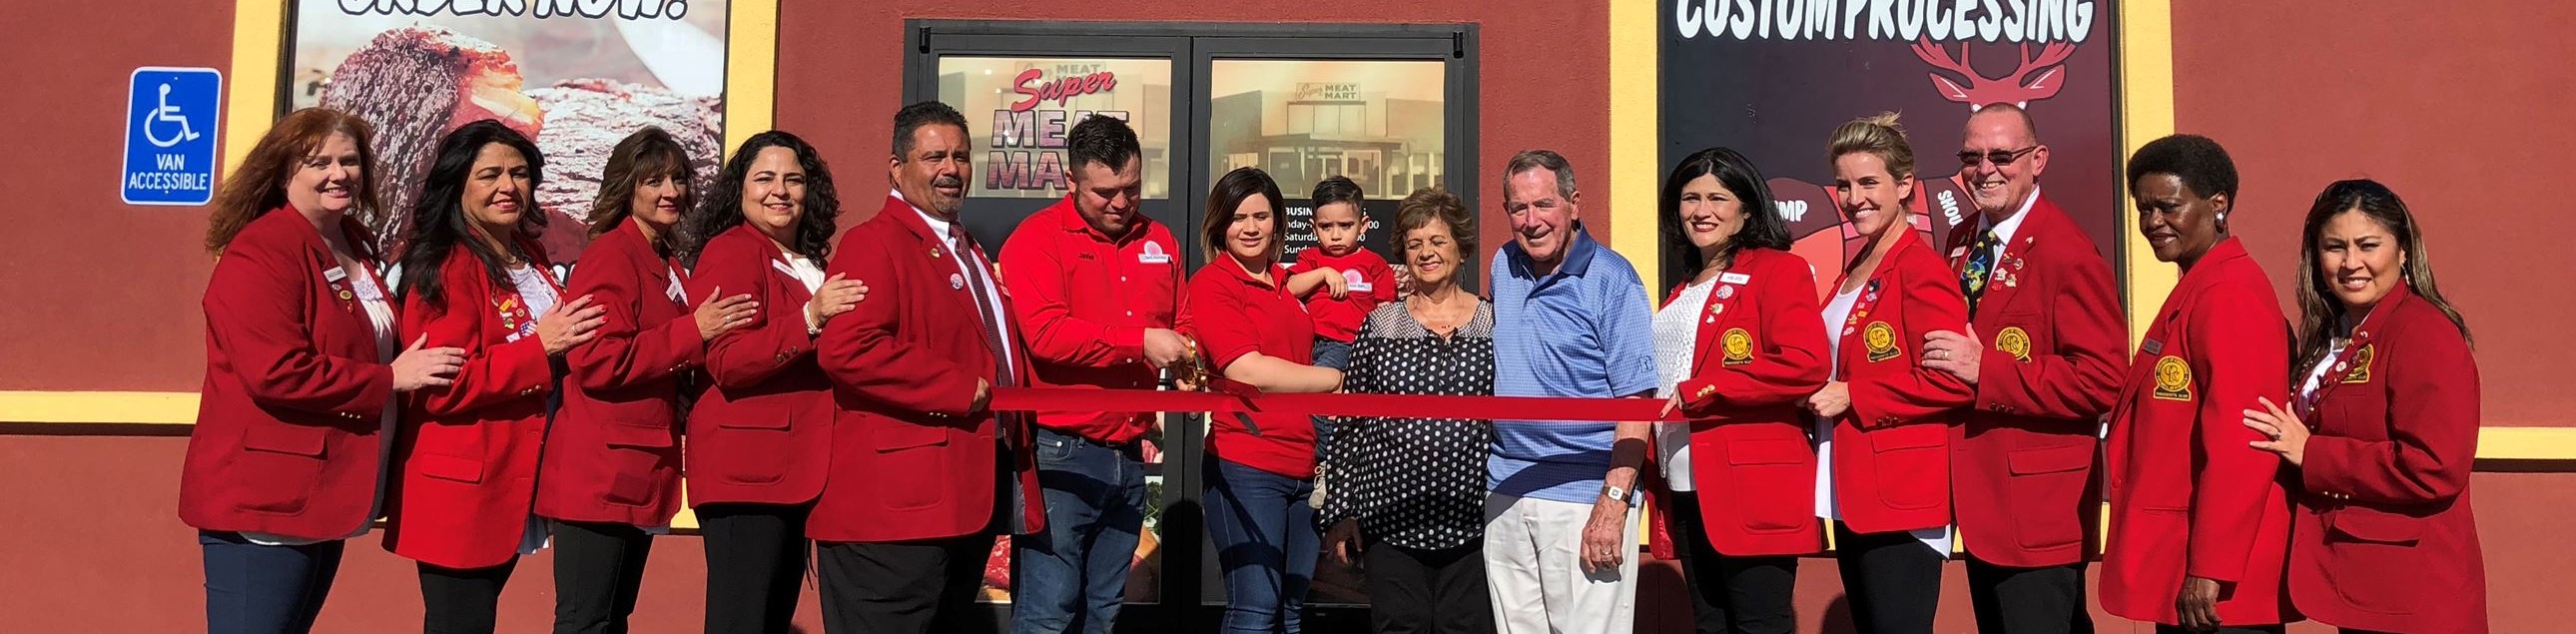 Redcoats attend ribbon cutting event at Super Meat Mart